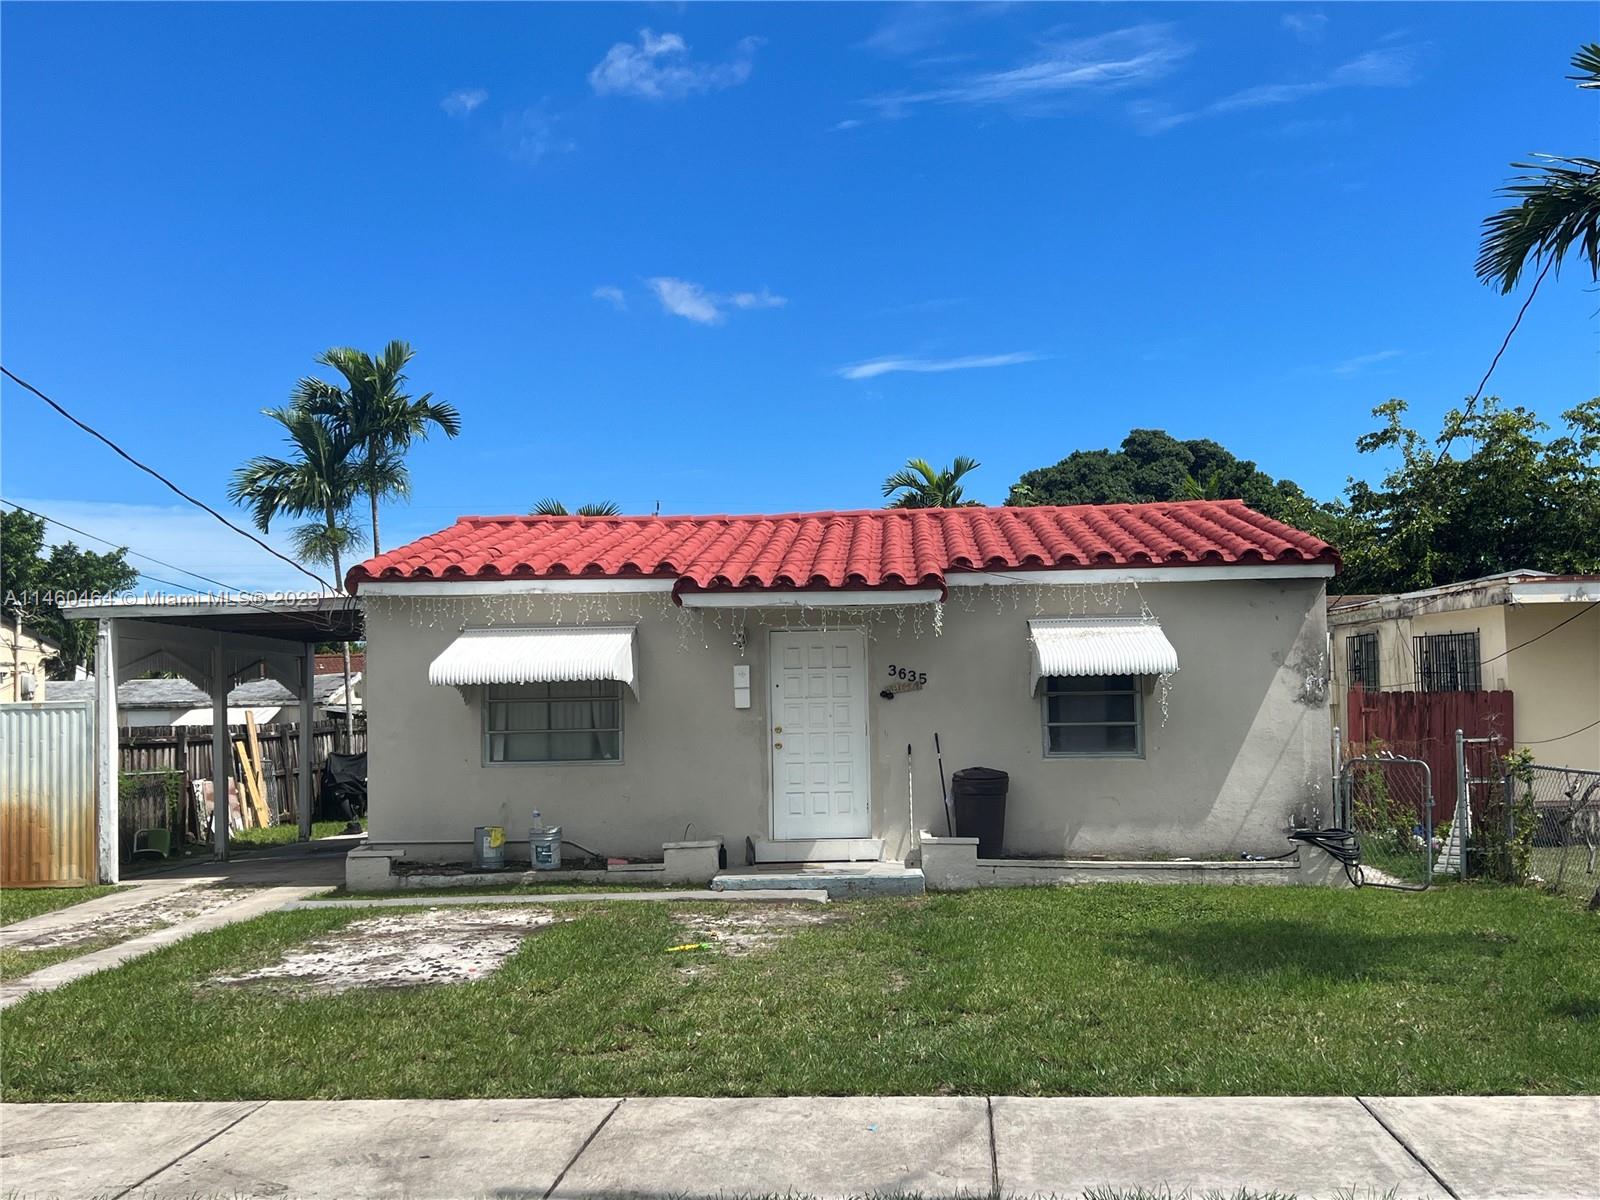 3635 SW 87th Pl, Miami, Florida 33165, 4 Bedrooms Bedrooms, ,2 BathroomsBathrooms,Residential,For Sale,3635 SW 87th Pl,A11460464